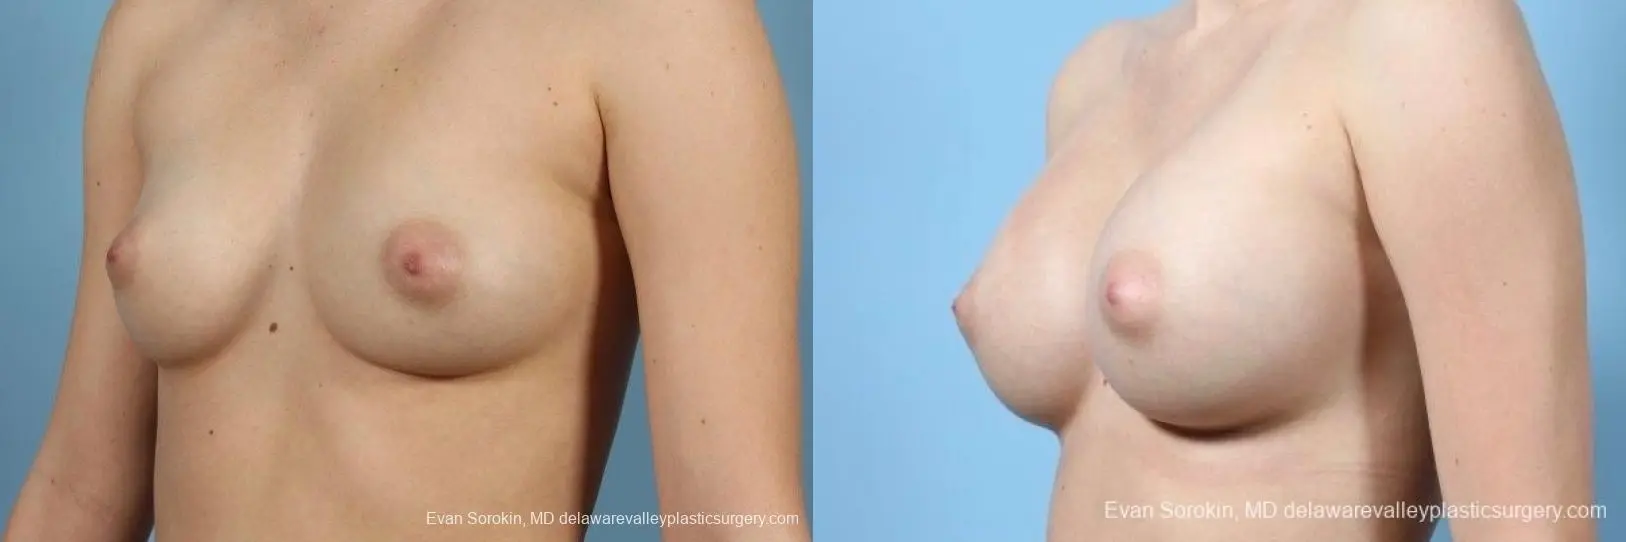 Philadelphia Breast Augmentation 8766 - Before and After 3